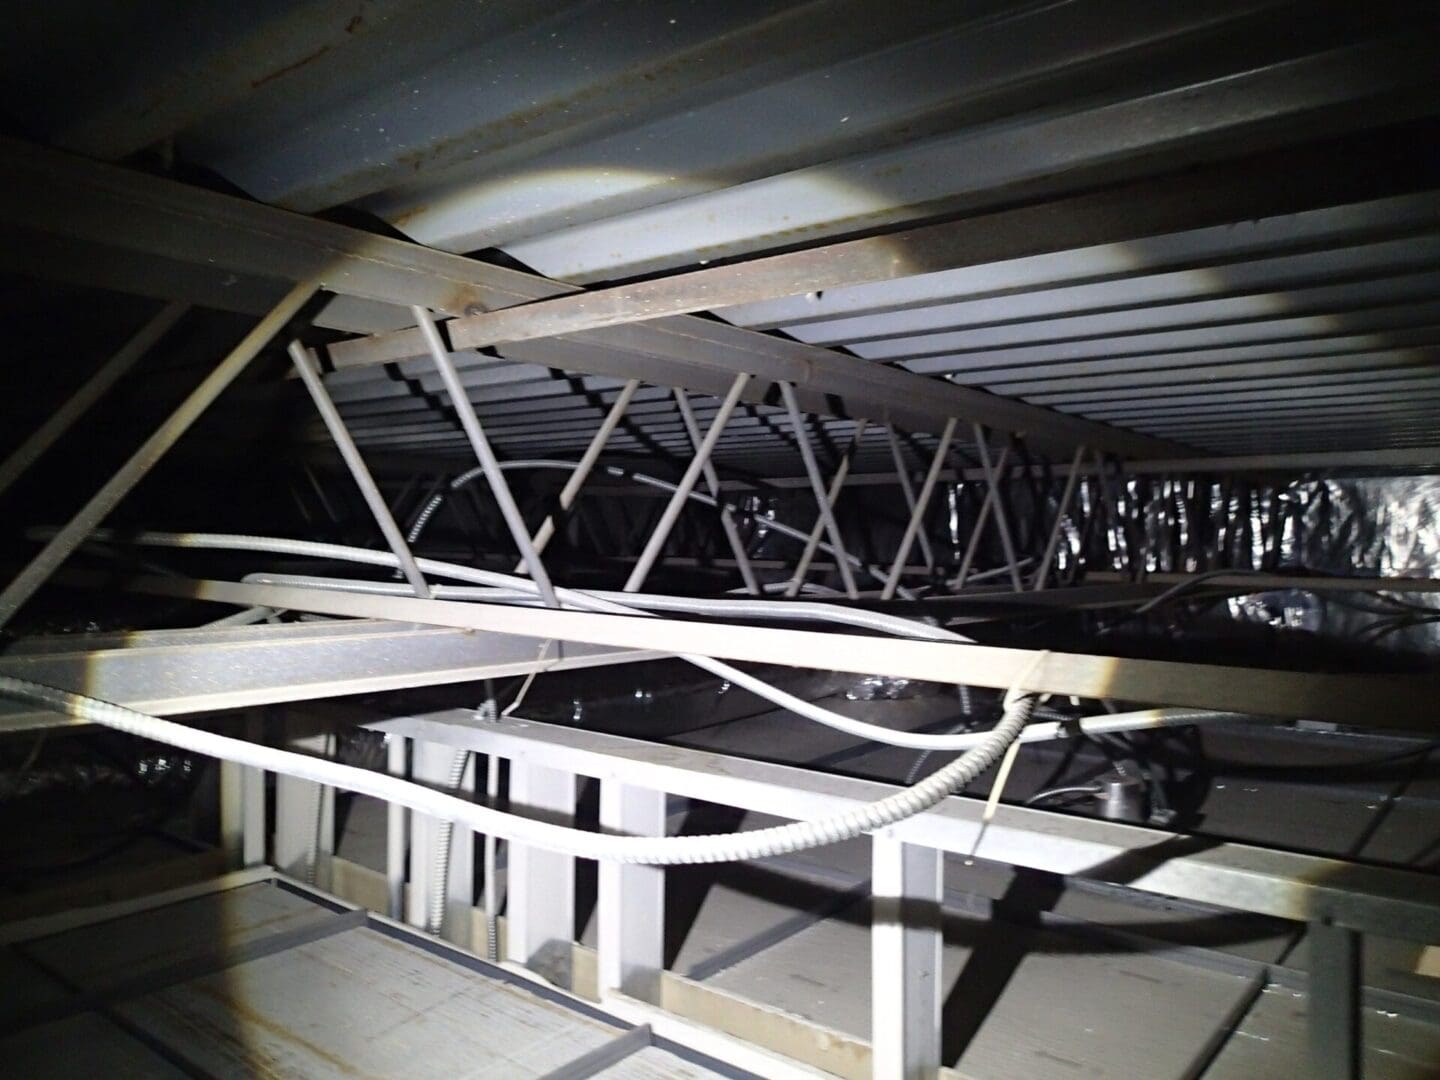 A view of some metal beams in the ceiling.